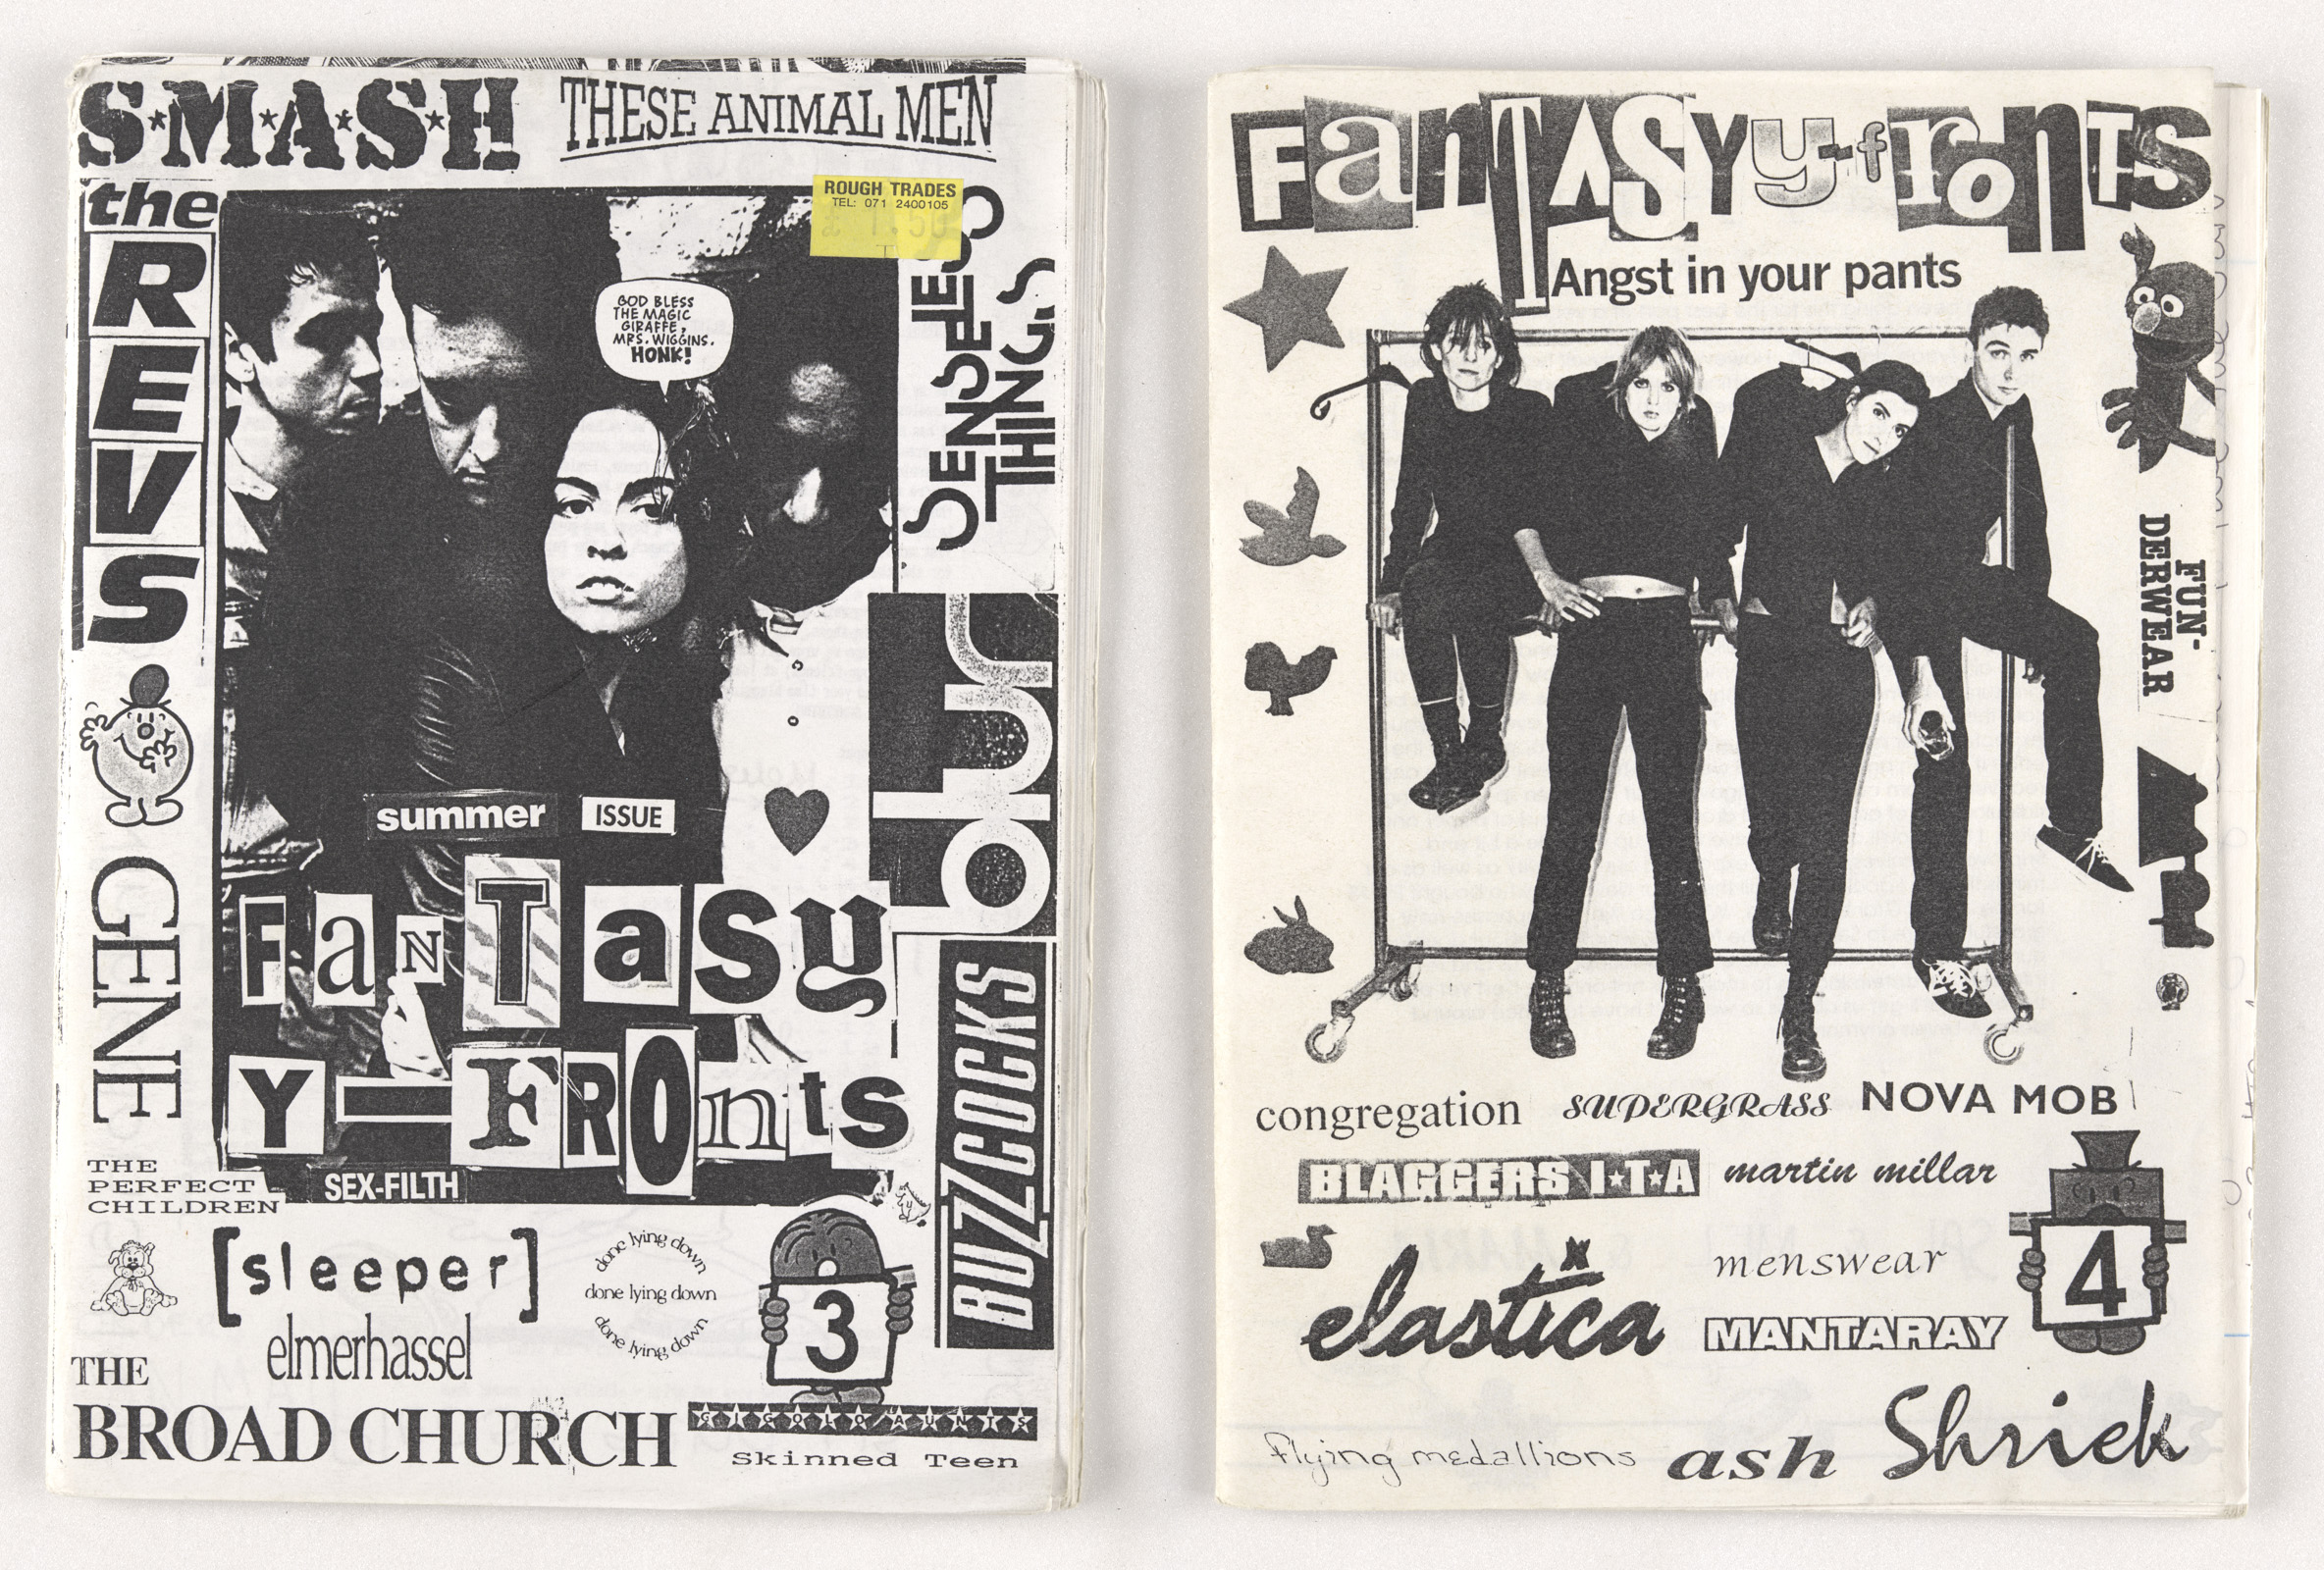 Photographs of the covers of two issues of Fantasy Y-Fronts zine, balck and white photocopies with images of bands alongside text and logos. 